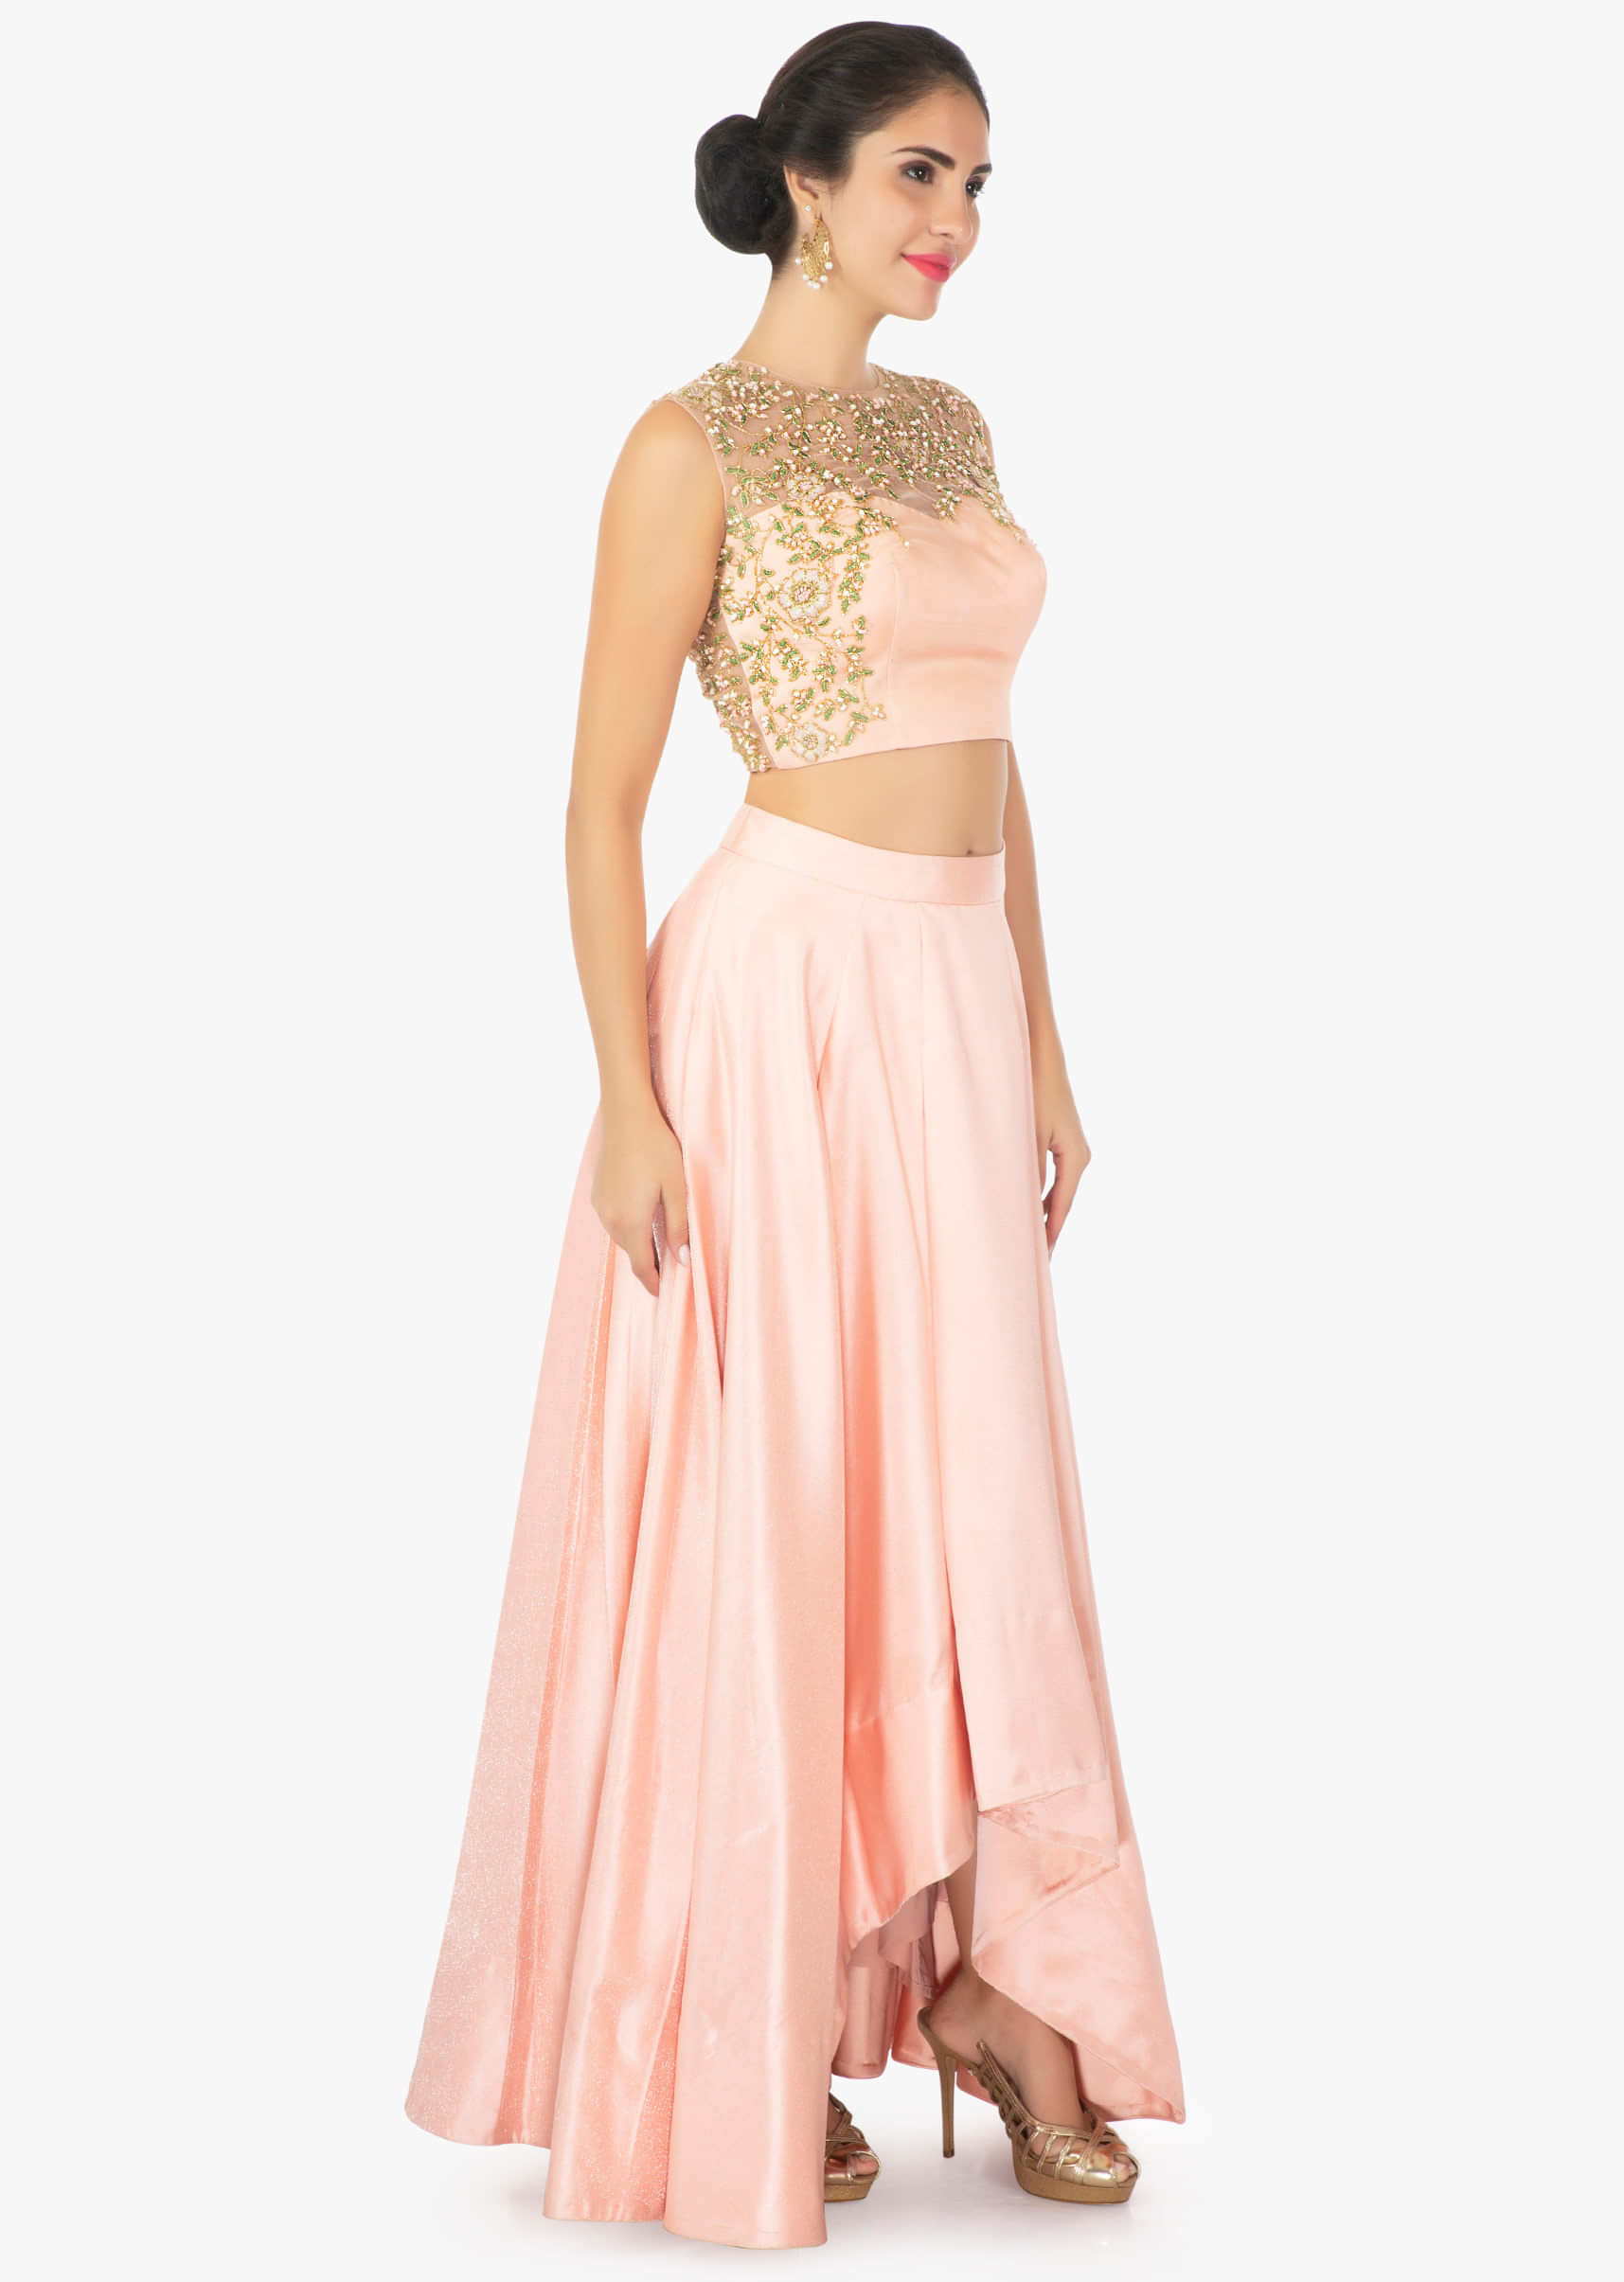 Peach satin skirt with a illusion neck  satin and net blouse